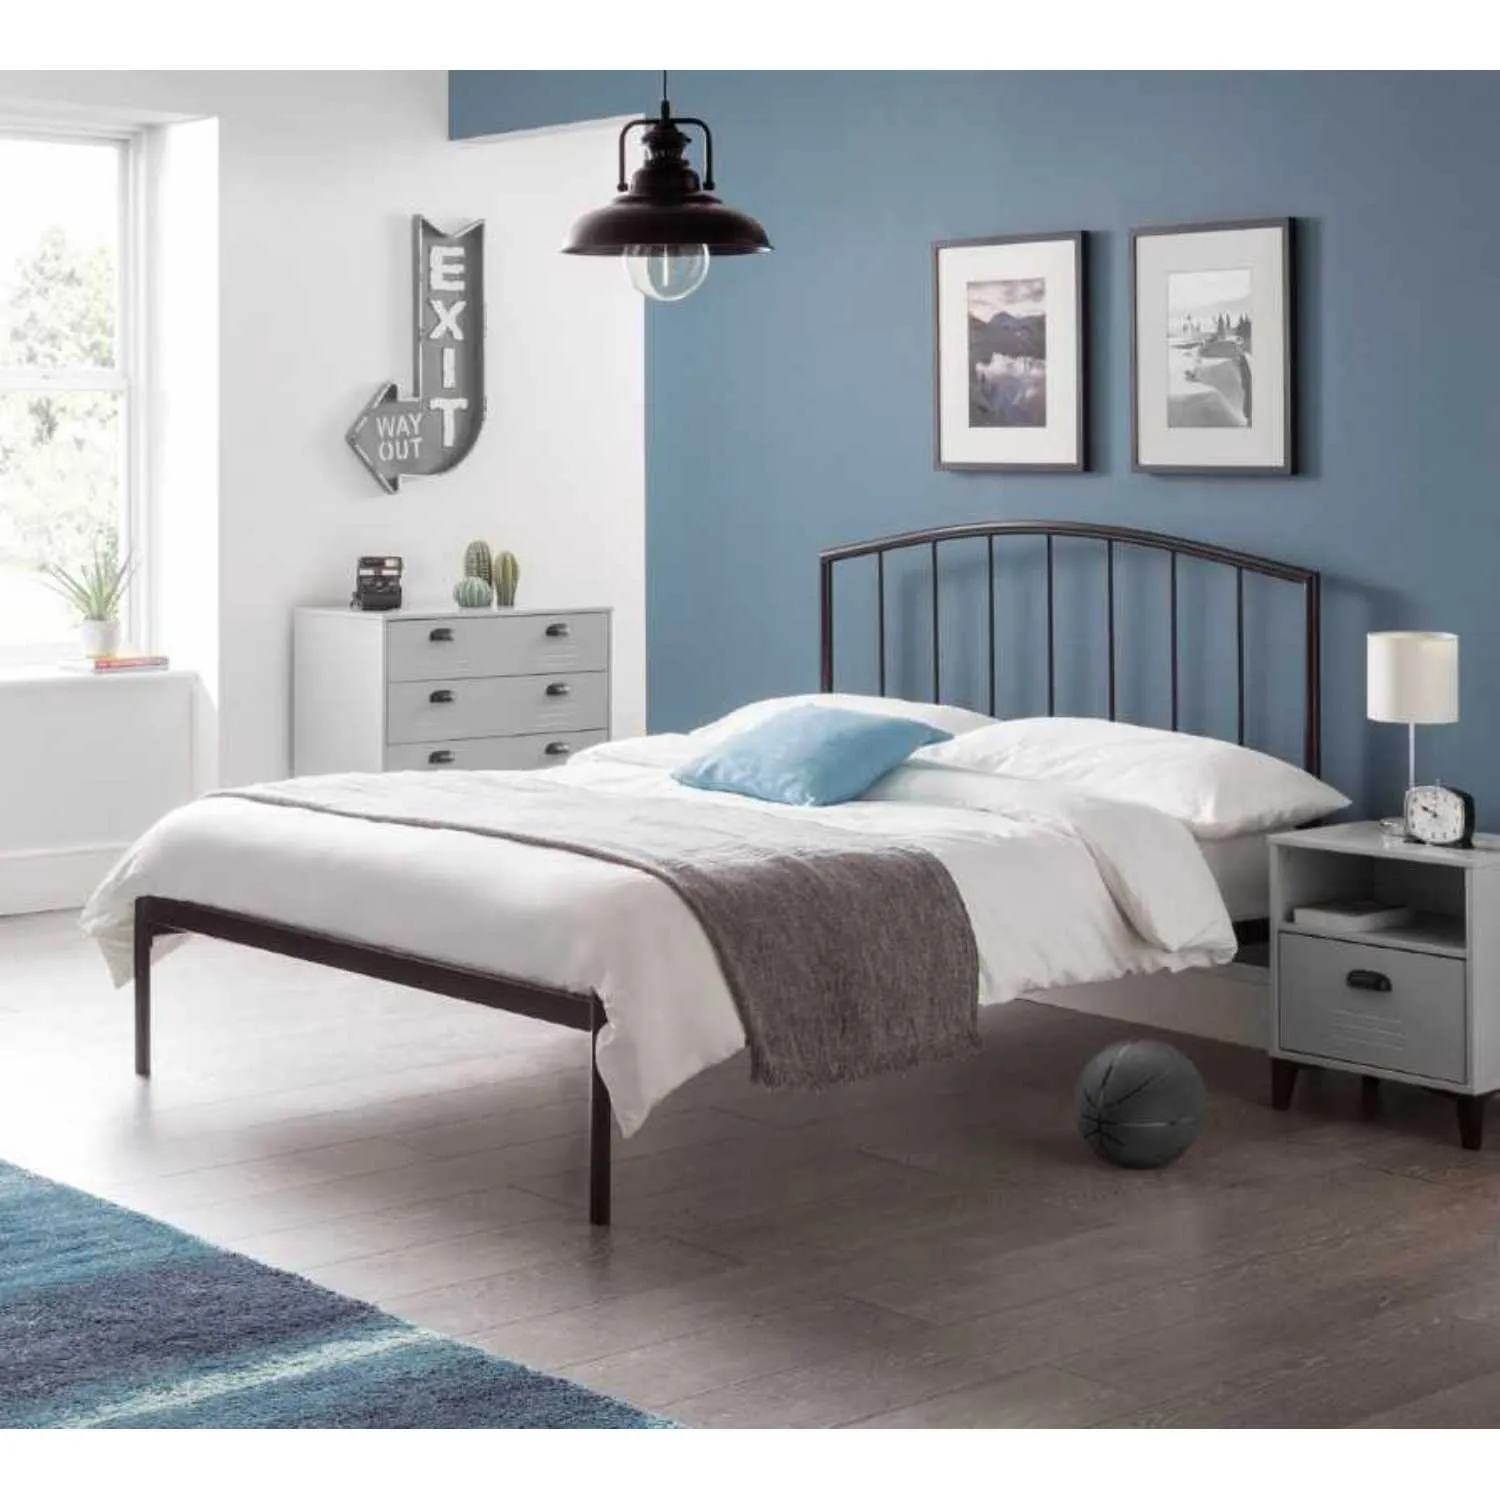 Anthracite Grey Modern Metal Arched Bedstead 135cm Double 4ft6in